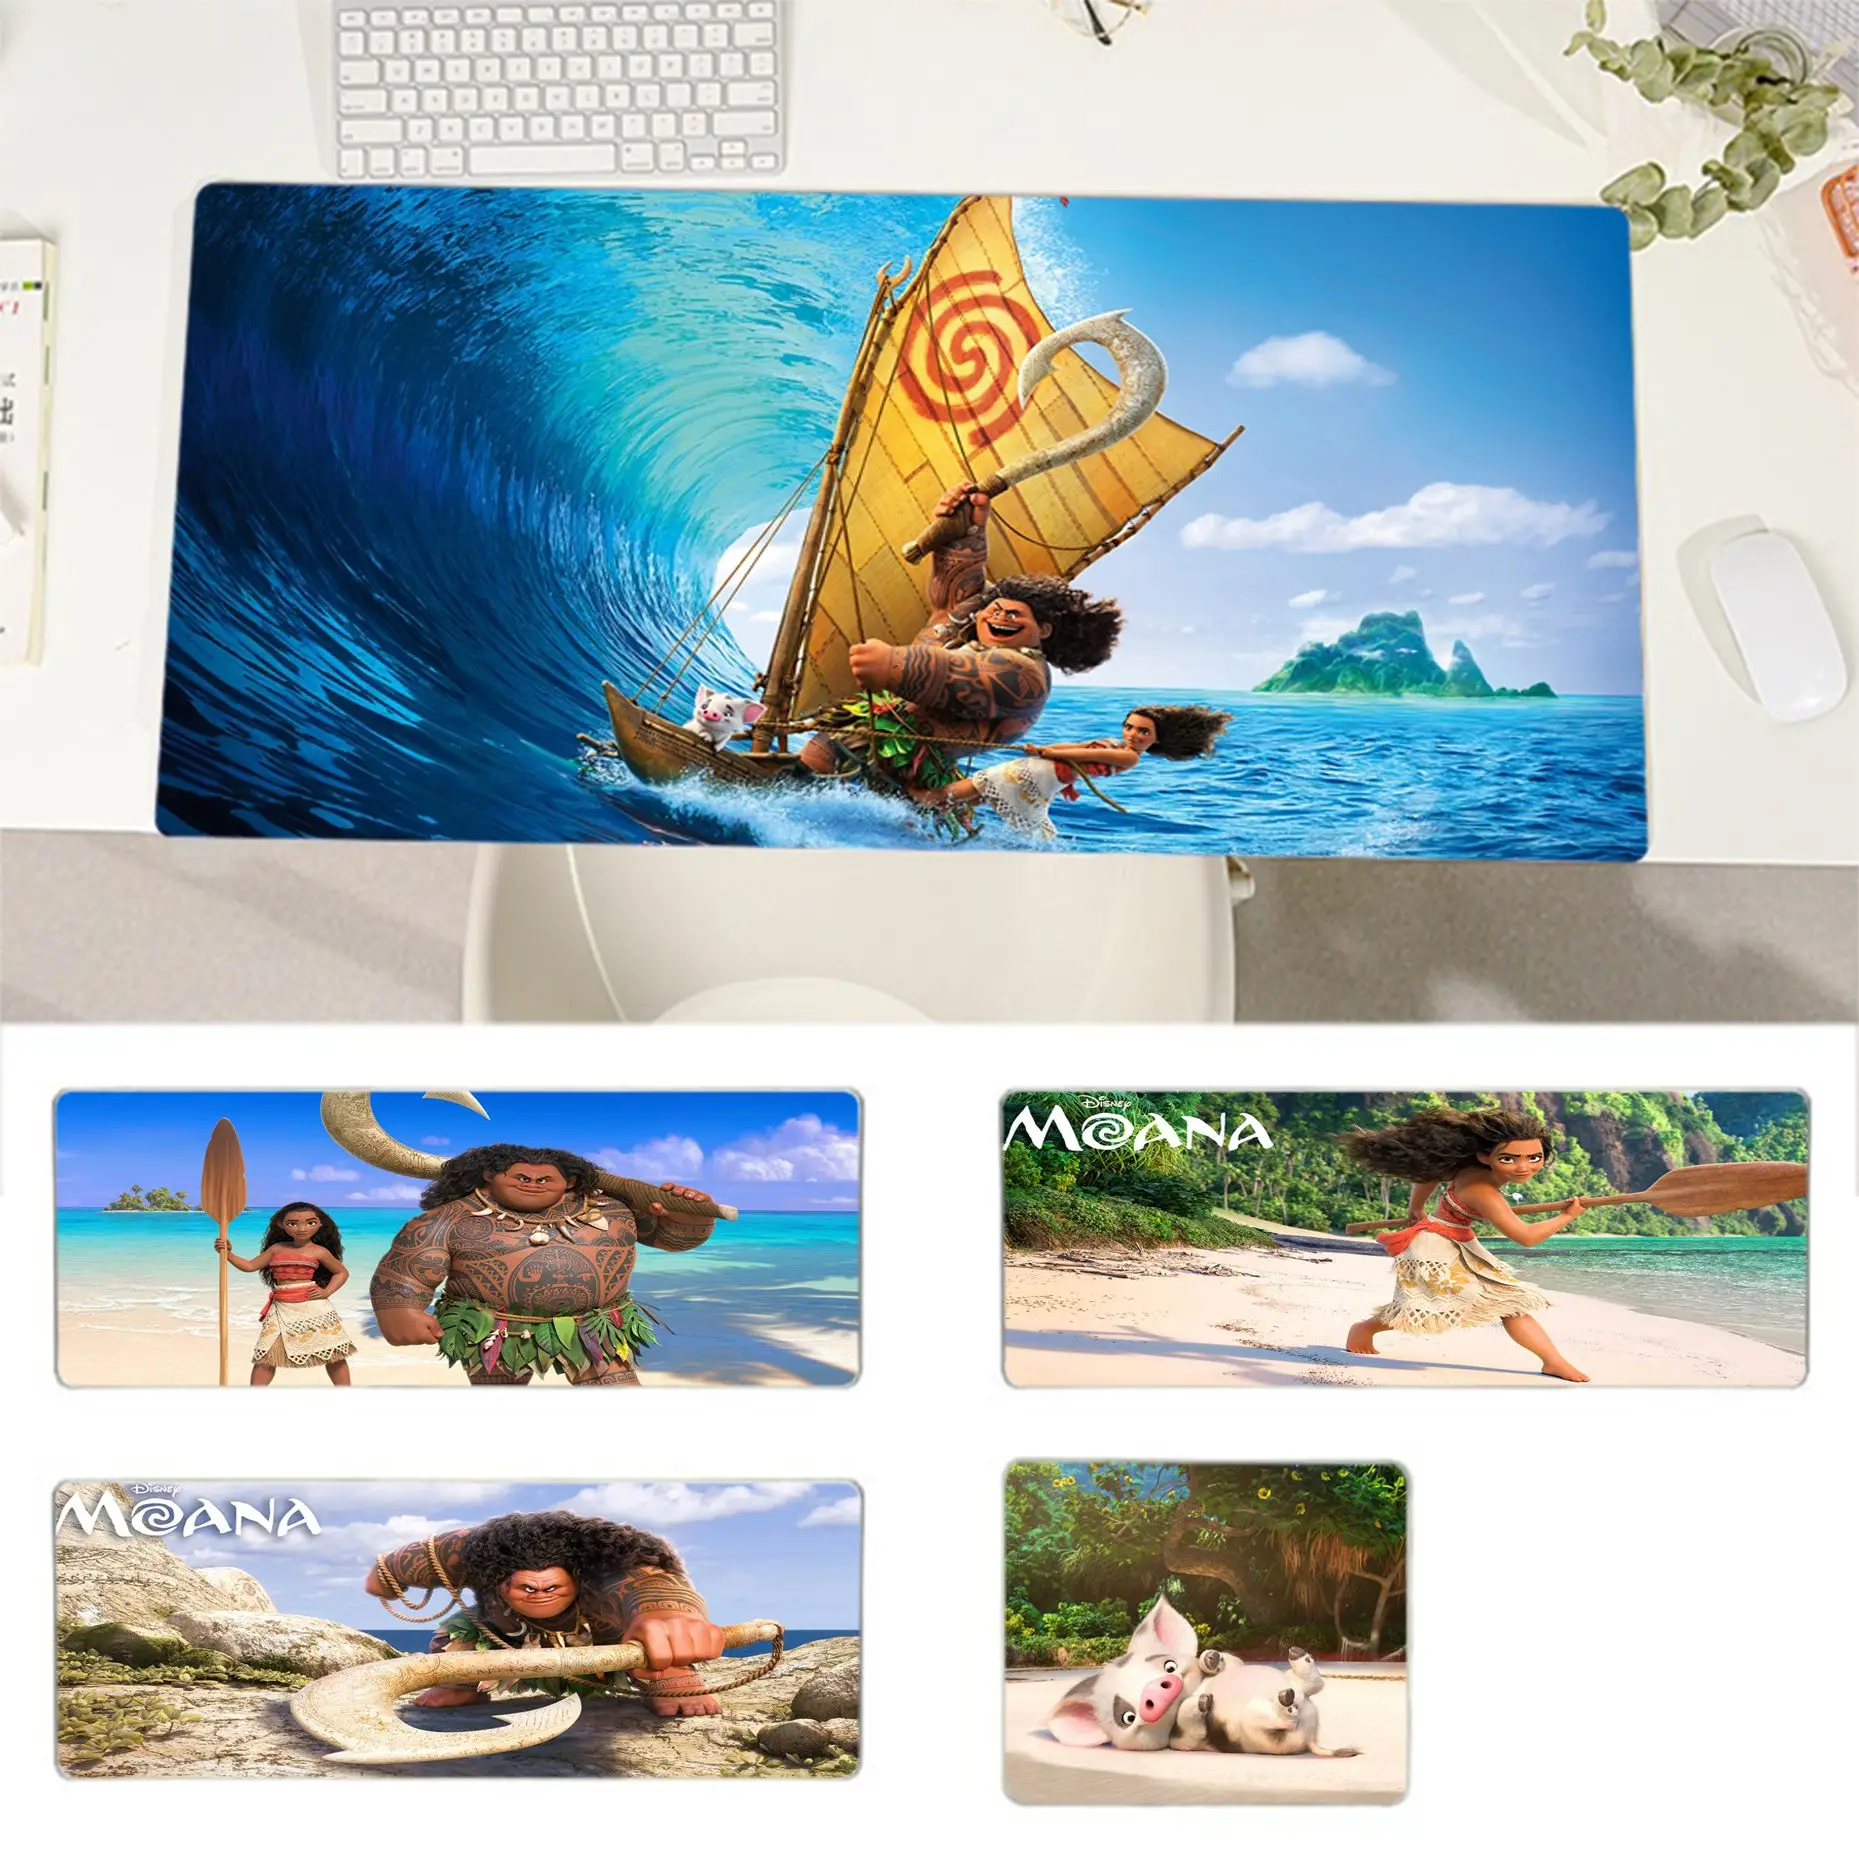 

Disney Moana New Arrivals Gamer Speed Mice Retail Small Rubber Mousepad Size For Large Edge Locking Game Keyboard Pad